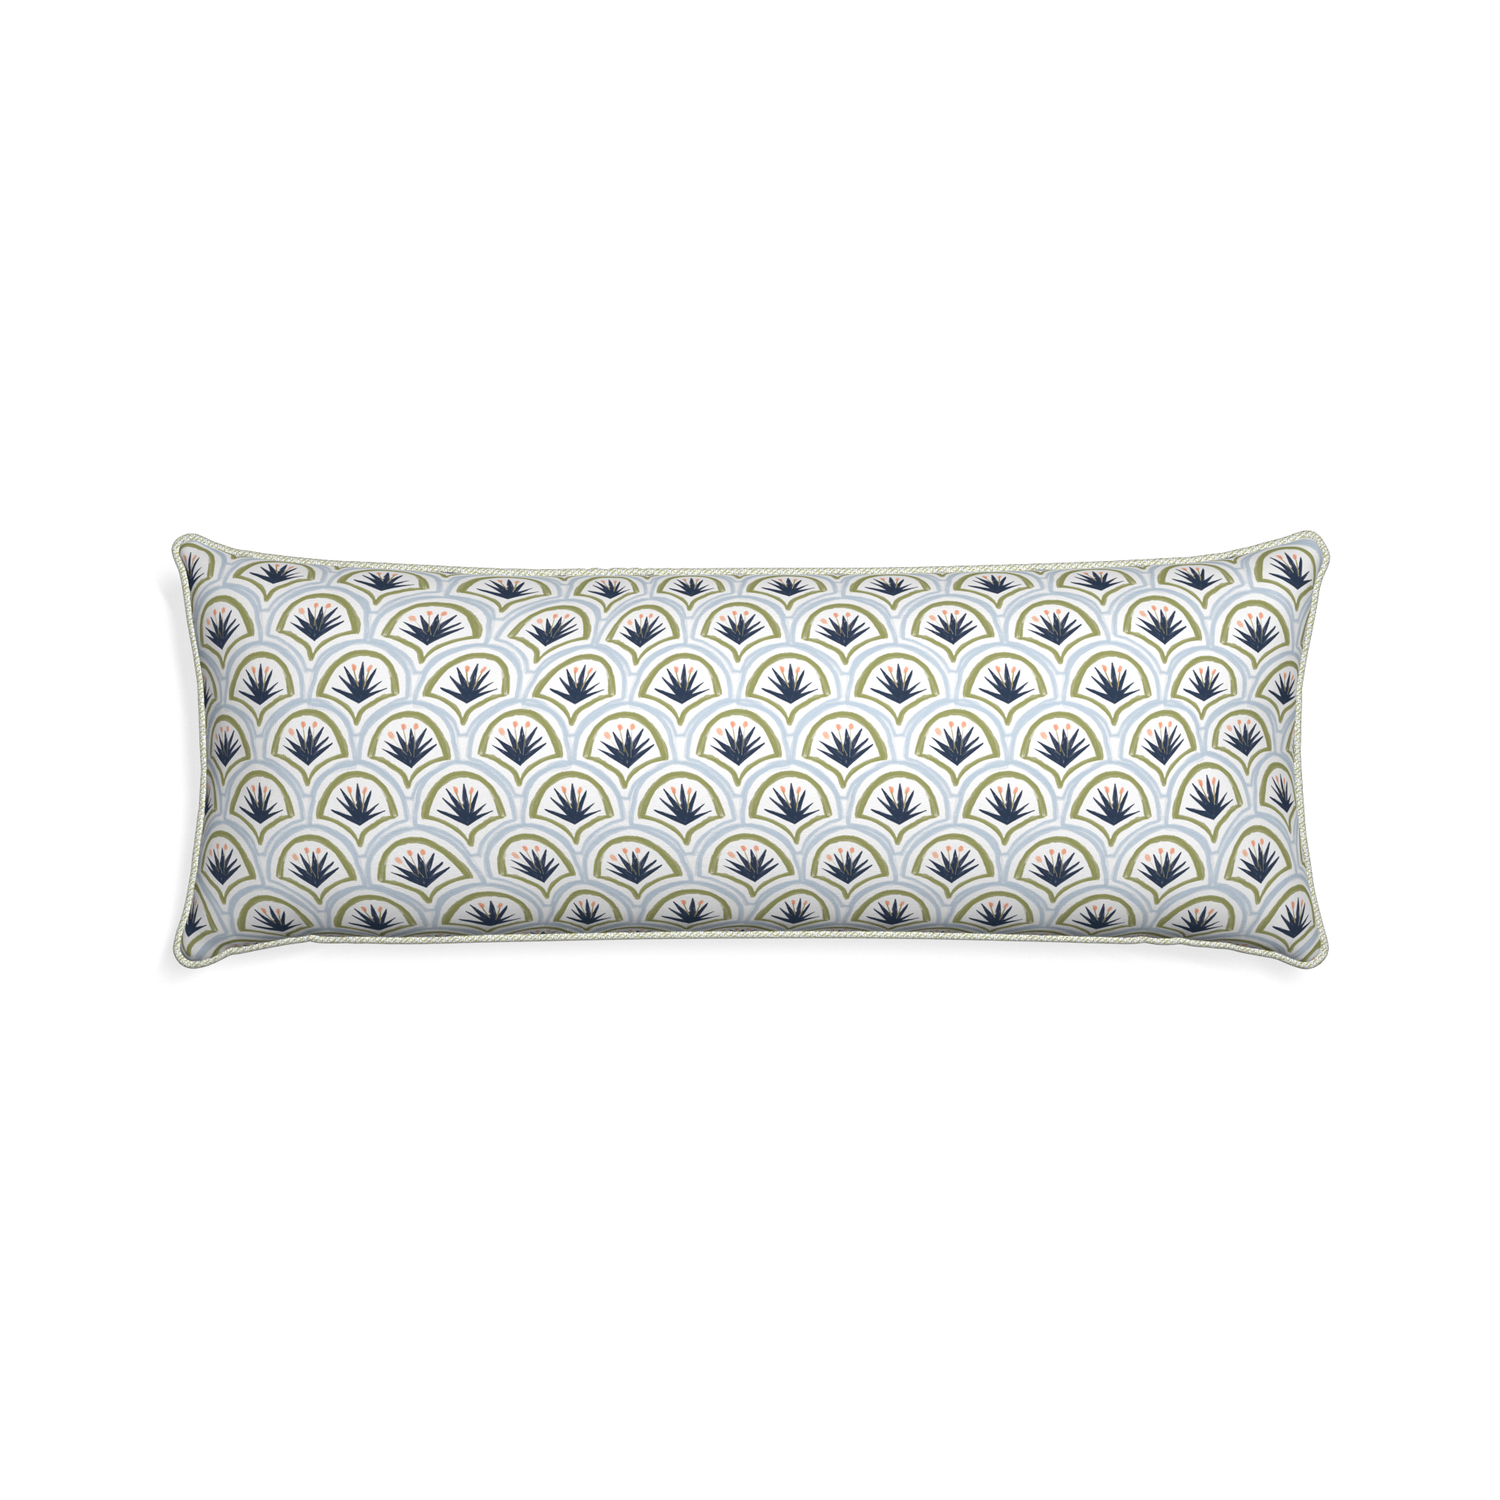 Xl-lumbar thatcher midnight custom art deco palm patternpillow with l piping on white background